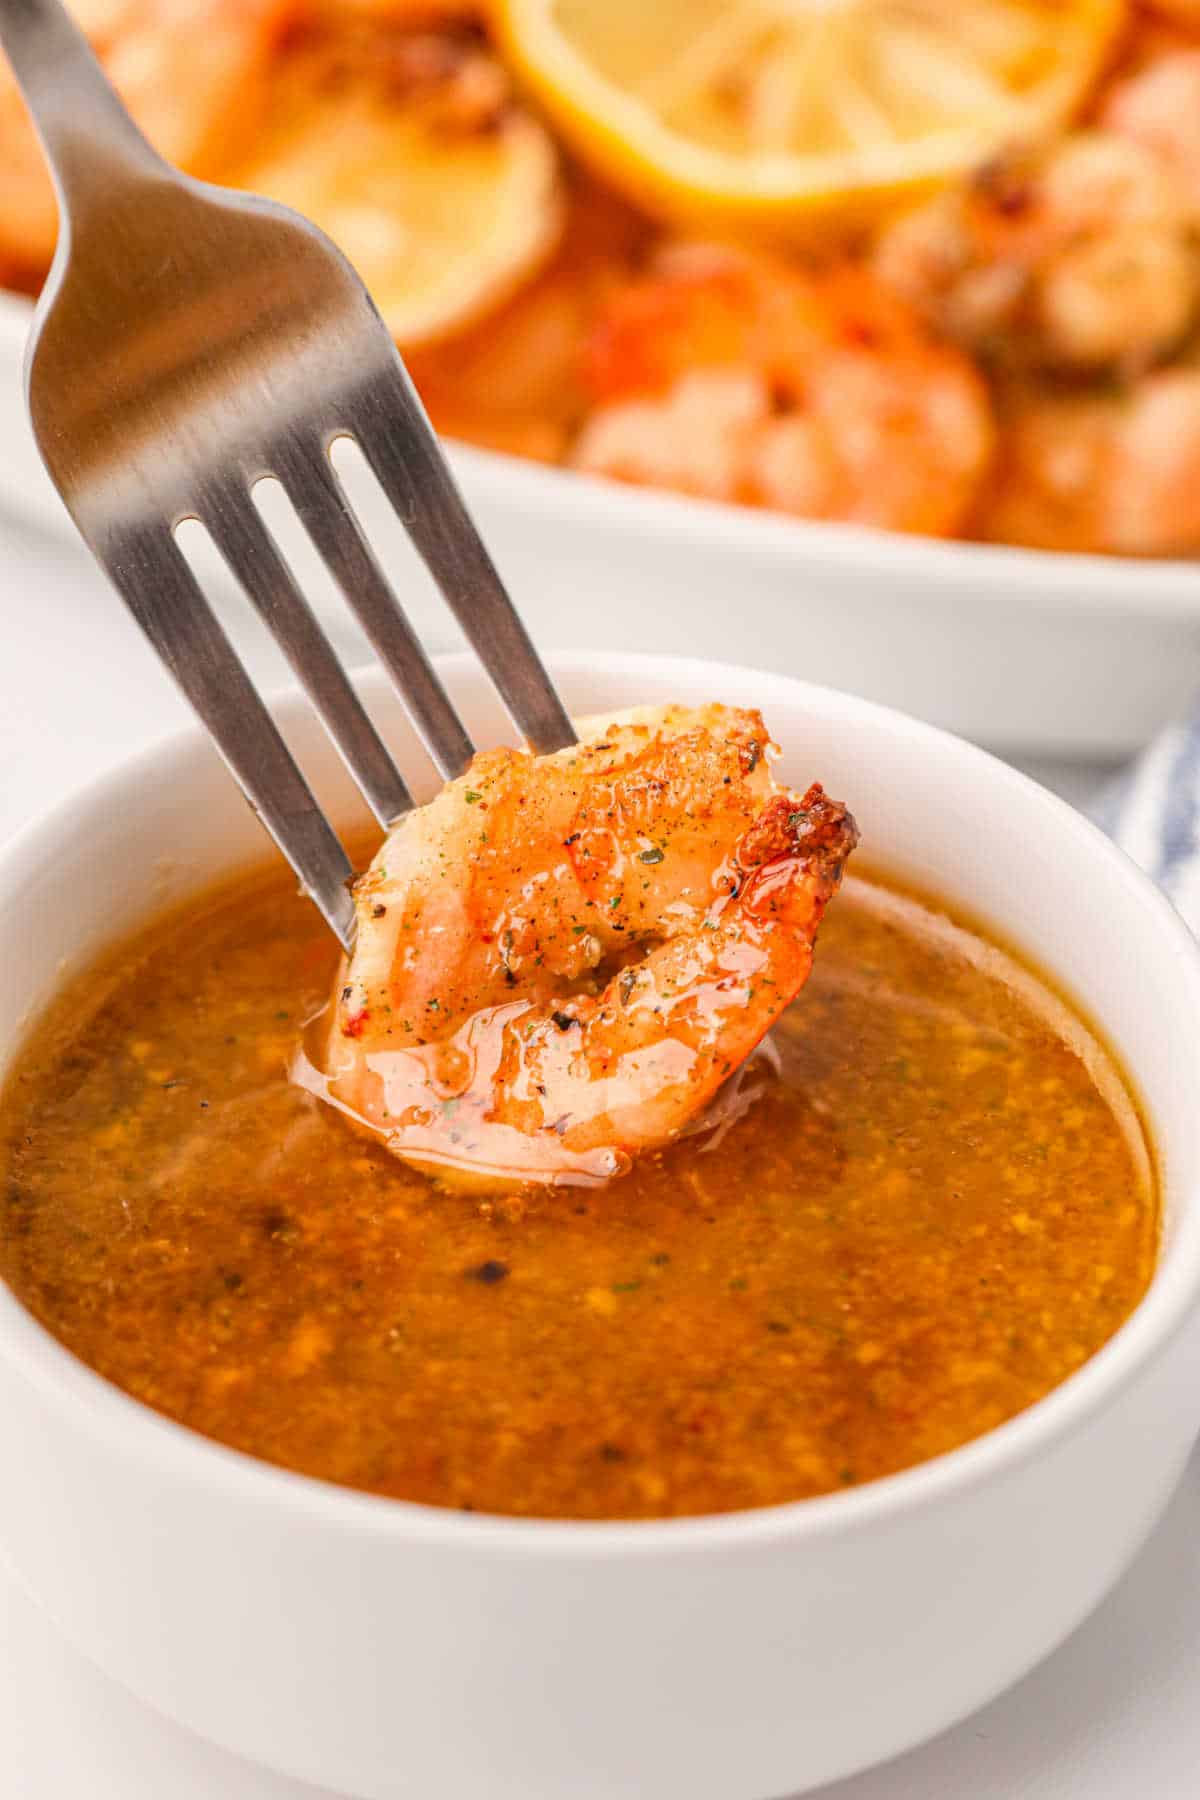 A fork with a shrimp on it dipping in a small bowl of sauce.